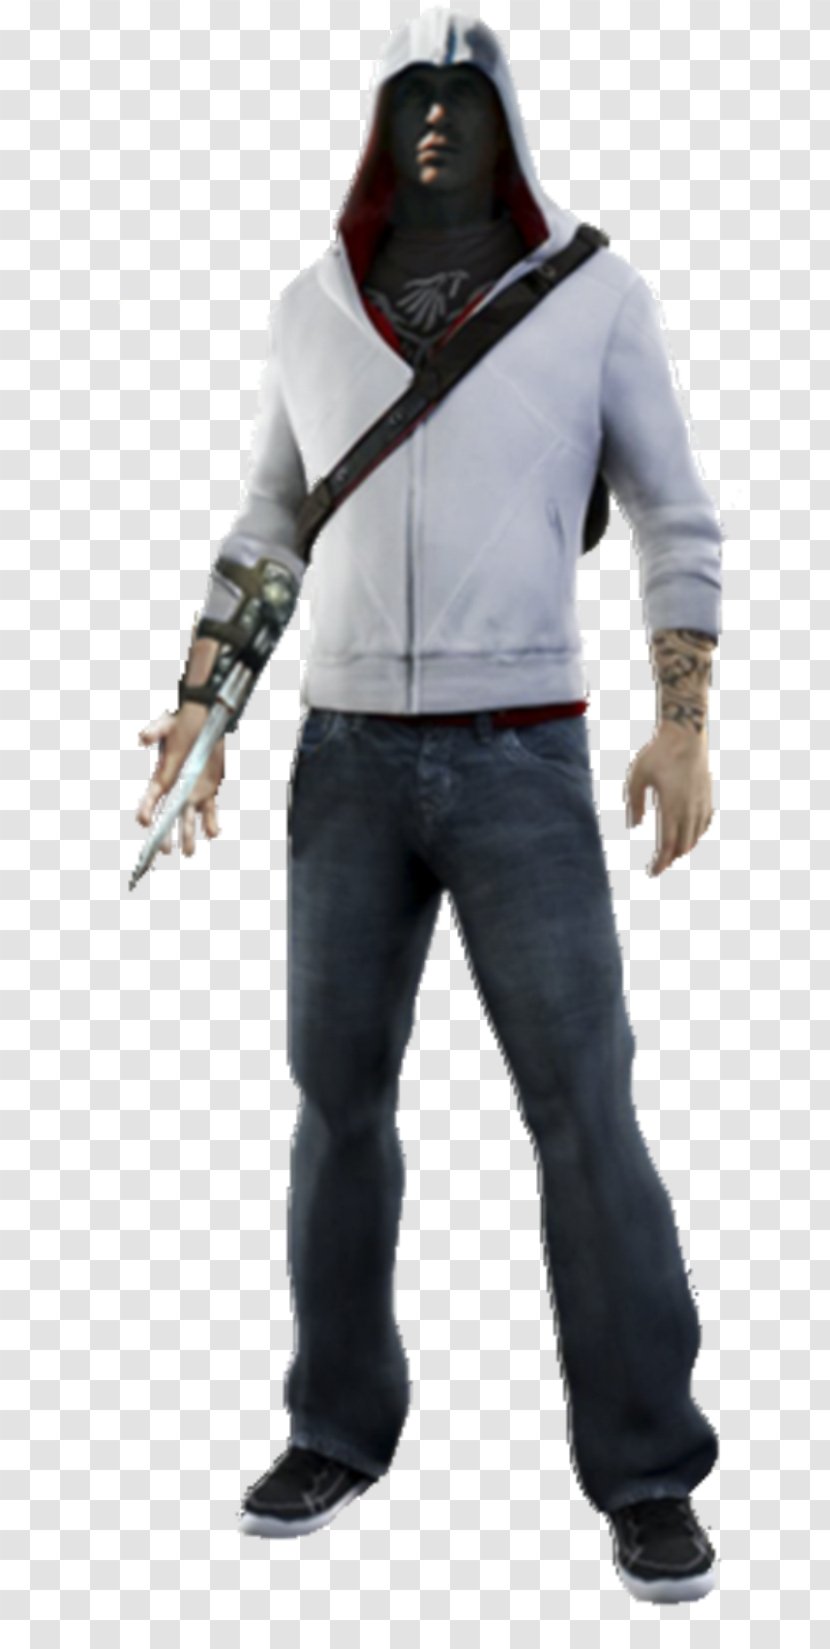 Assassin's Creed: Revelations Creed III Desmond Miles Assassins Video Game - Costume Transparent PNG